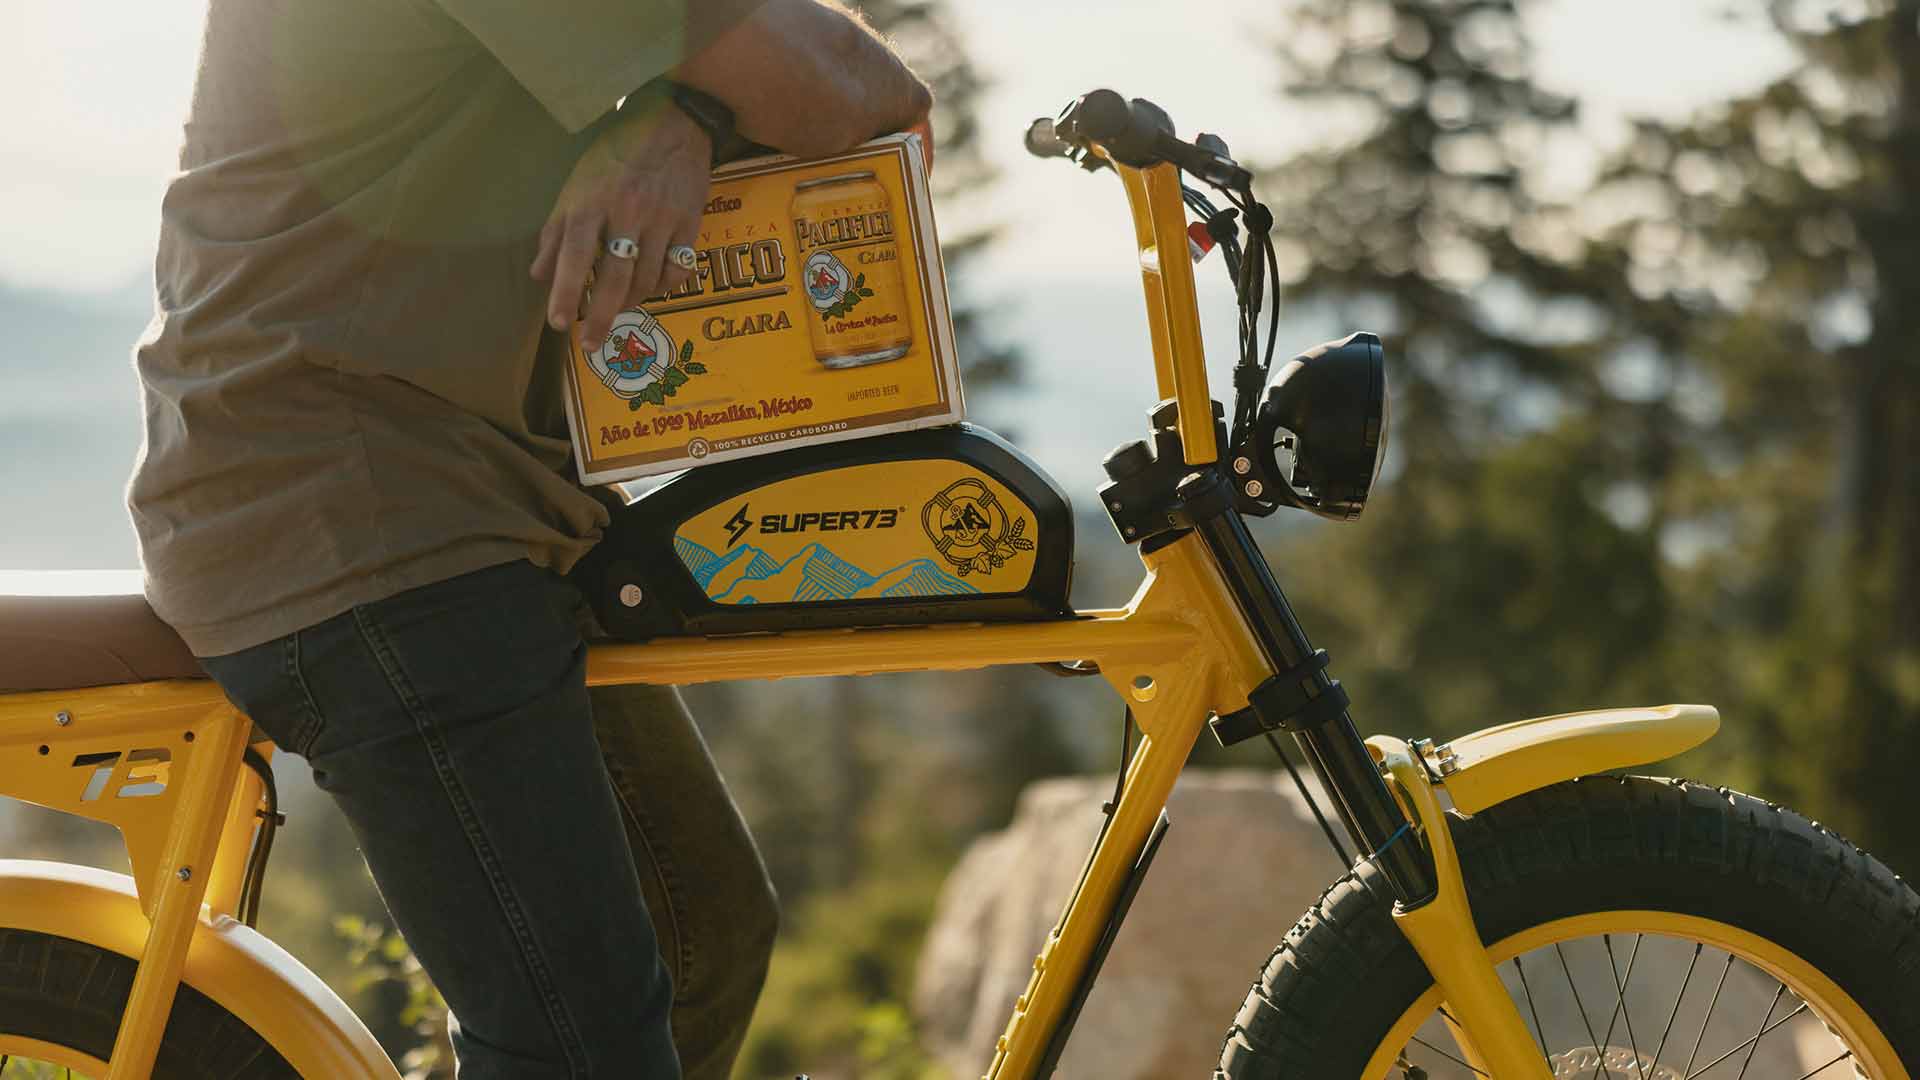 Man sitting on a custom Pacifico x SUPER73-S2 bike holding a case of Pacifico beer.